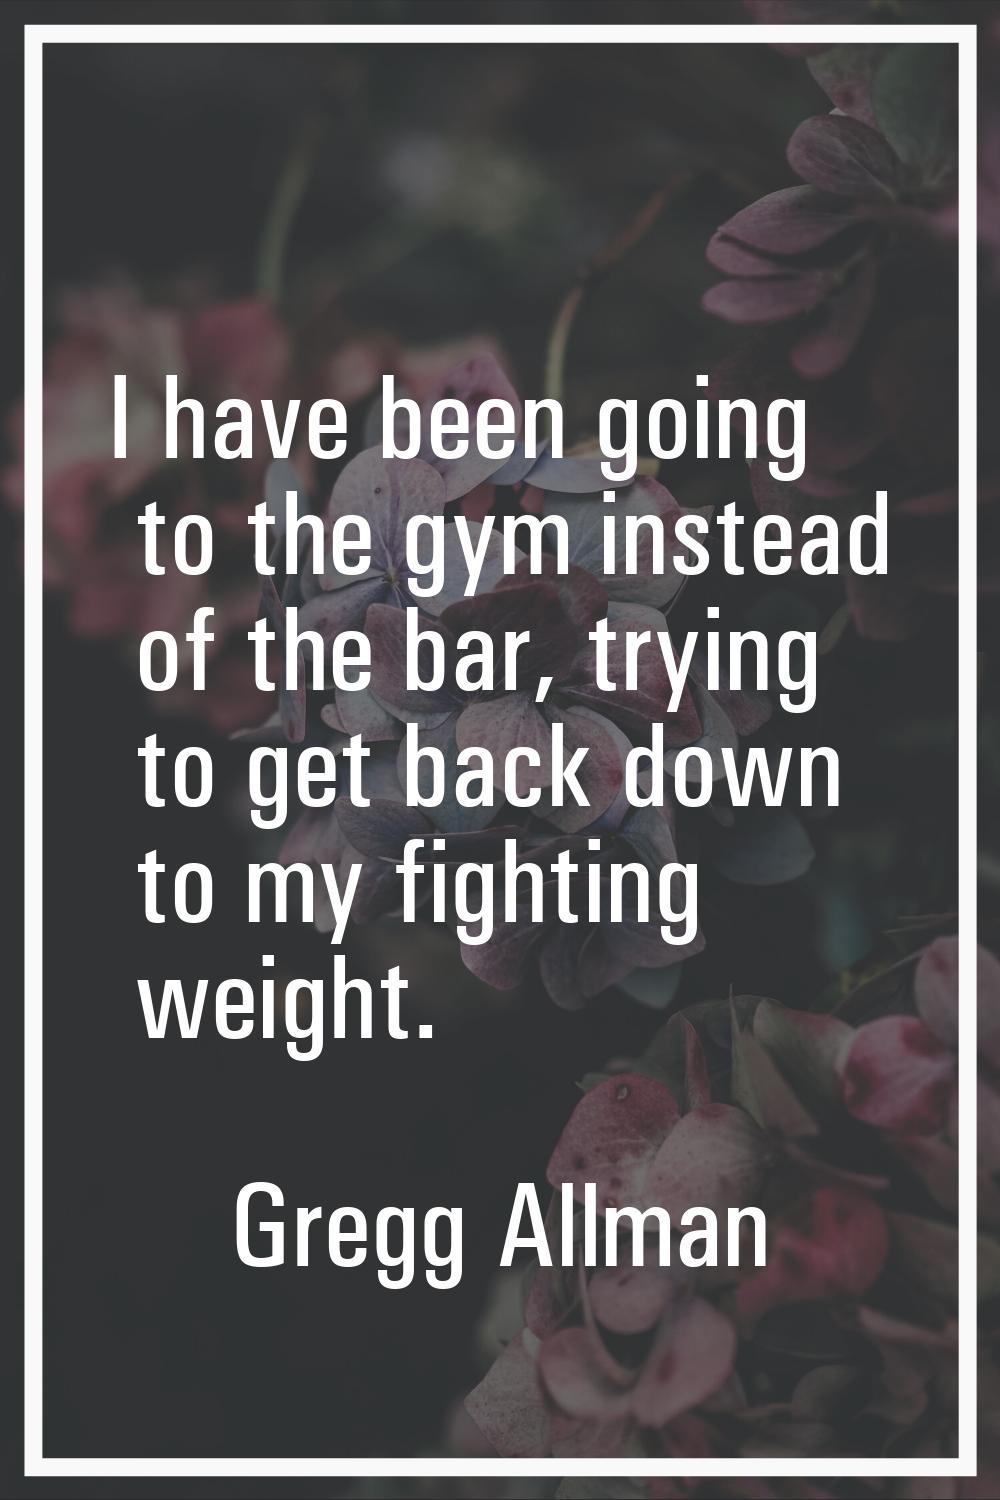 I have been going to the gym instead of the bar, trying to get back down to my fighting weight.